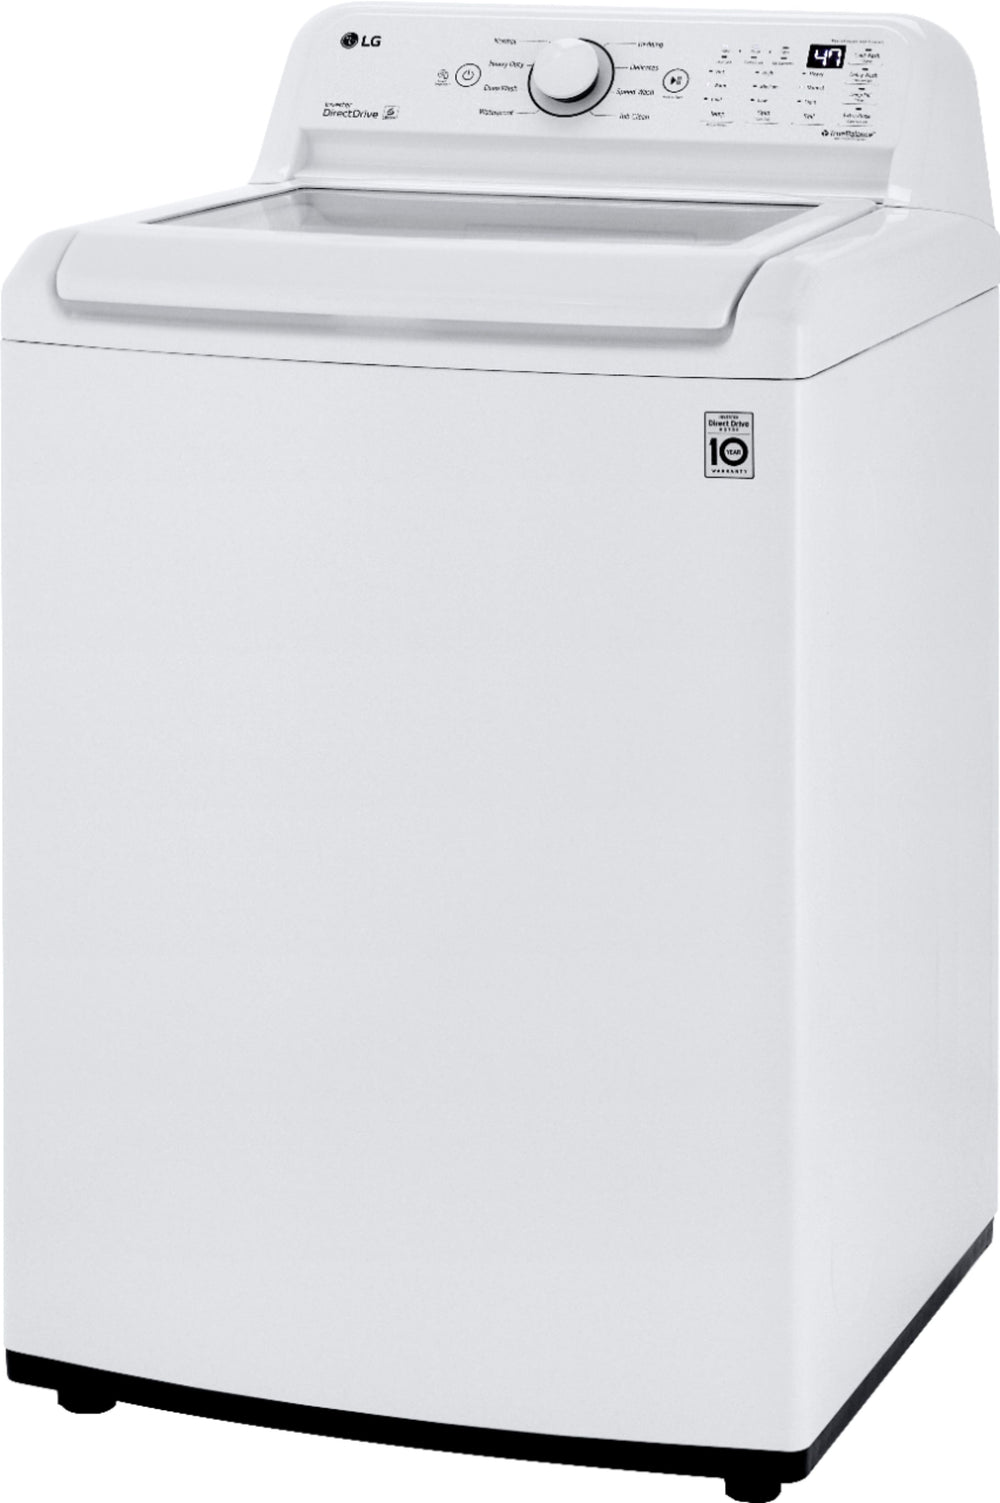 LG - 4.3 Cu. Ft. High-Efficiency Smart Top Load Washer with TurboDrum Technology - White_1